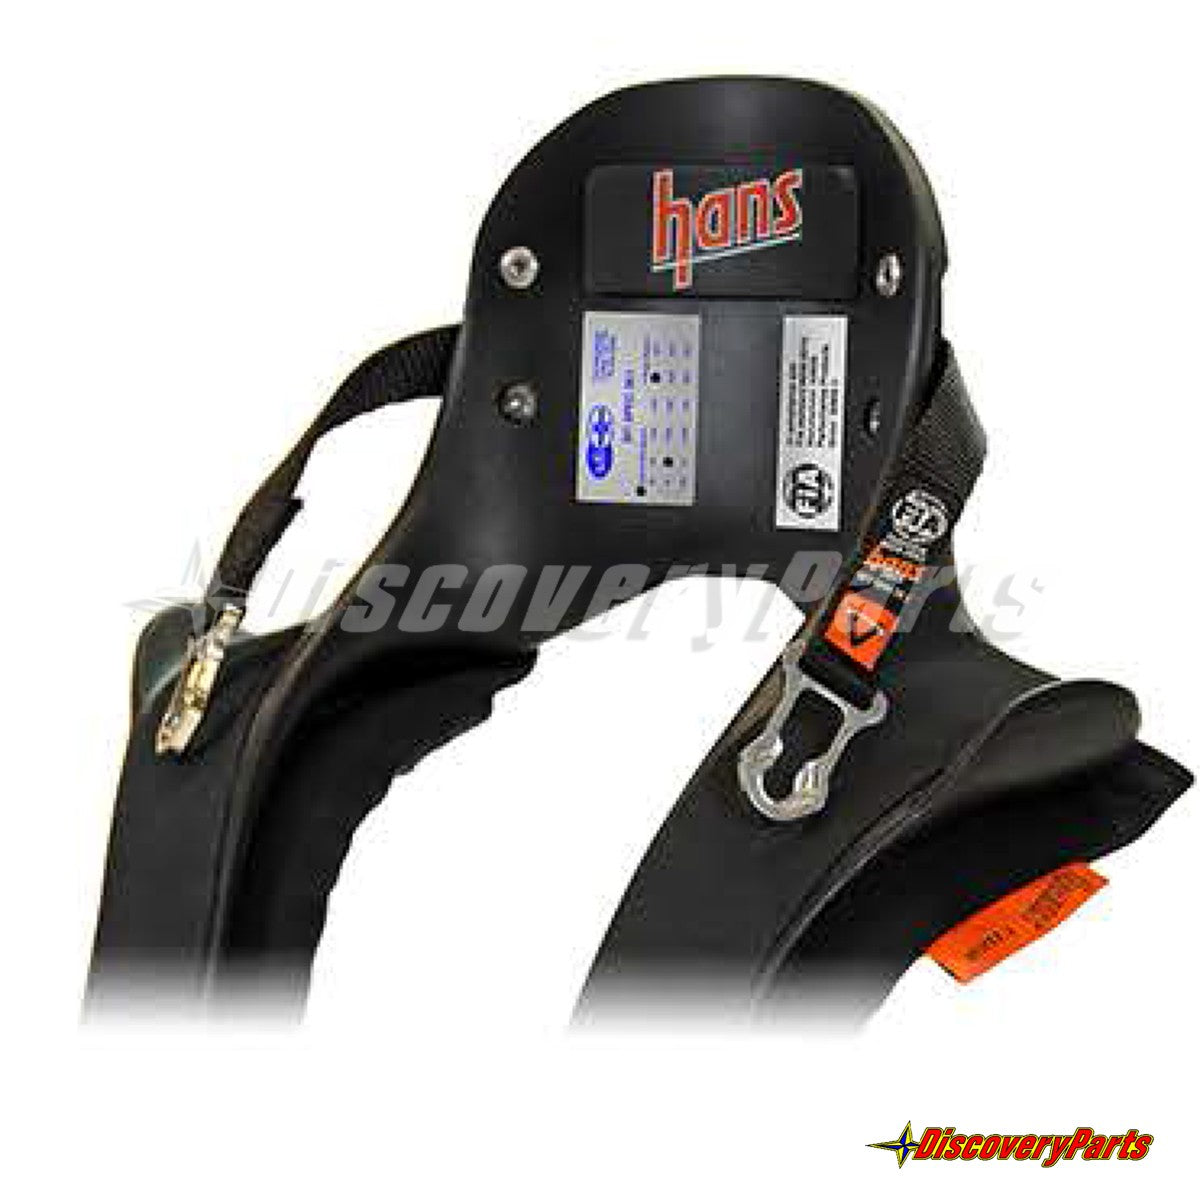 Image of HANS Device 24 Hour Express Recertification